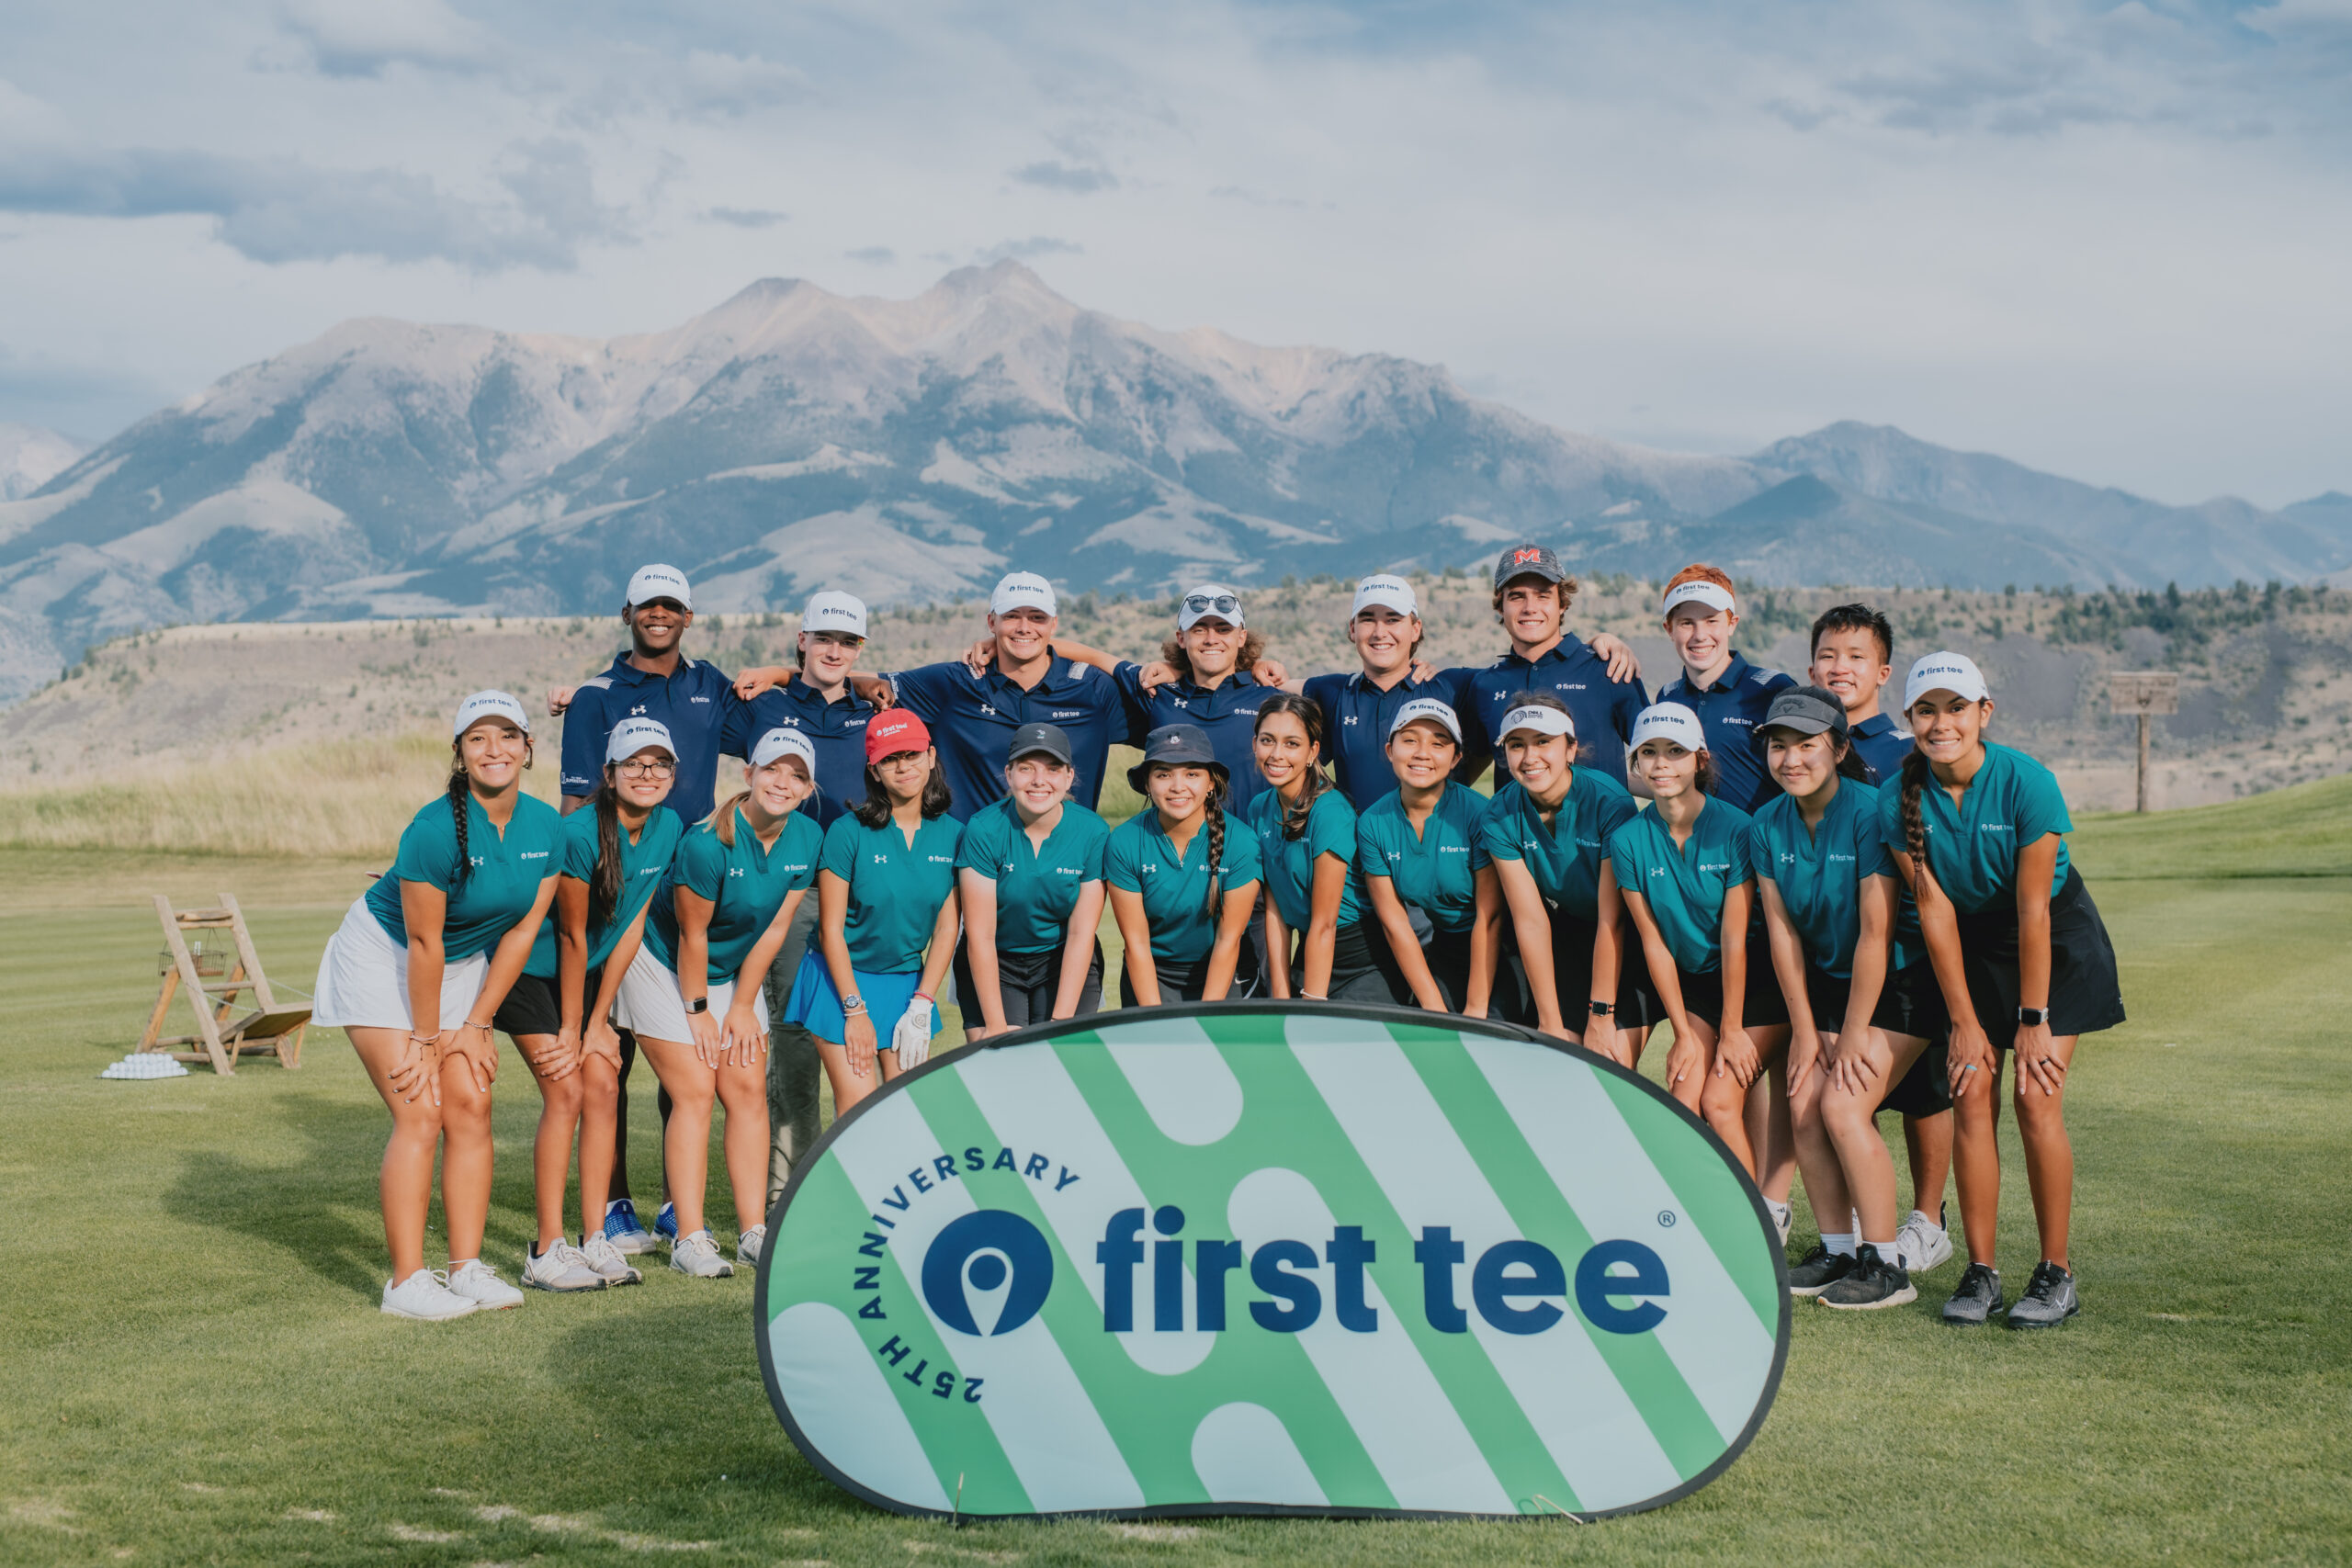 Group of First Tee participants posed in front of a mountain at the 2022 First Tee Leadership Summit.